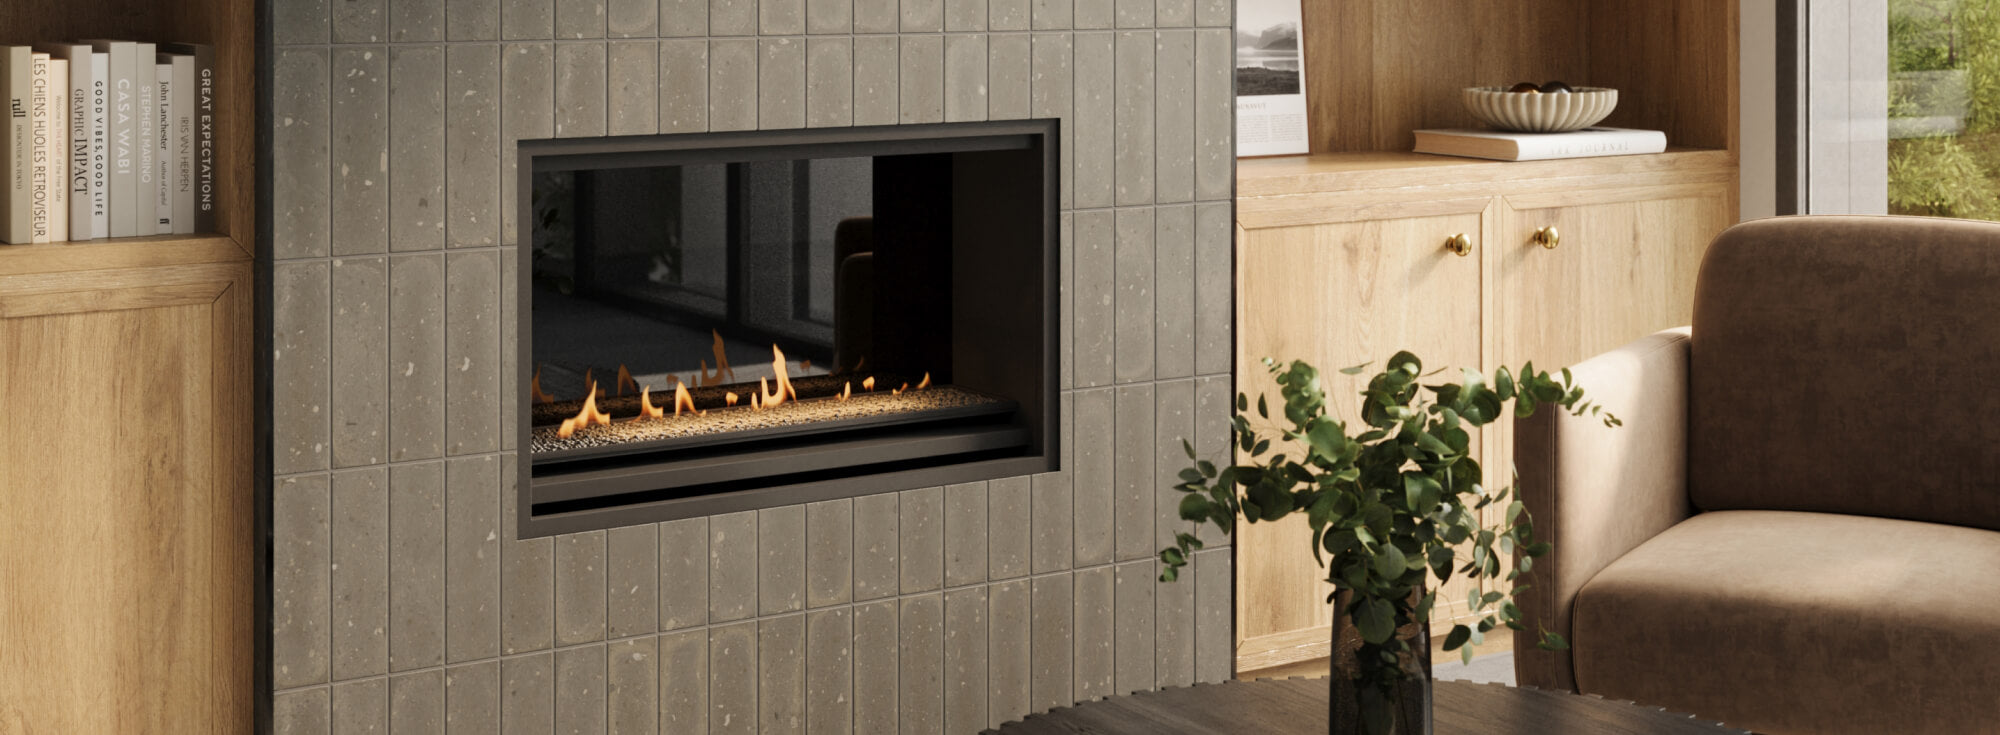 Cozy fireplace enhanced with concrete look tiles, combining warmth with industrial chic for a comforting ambiance.